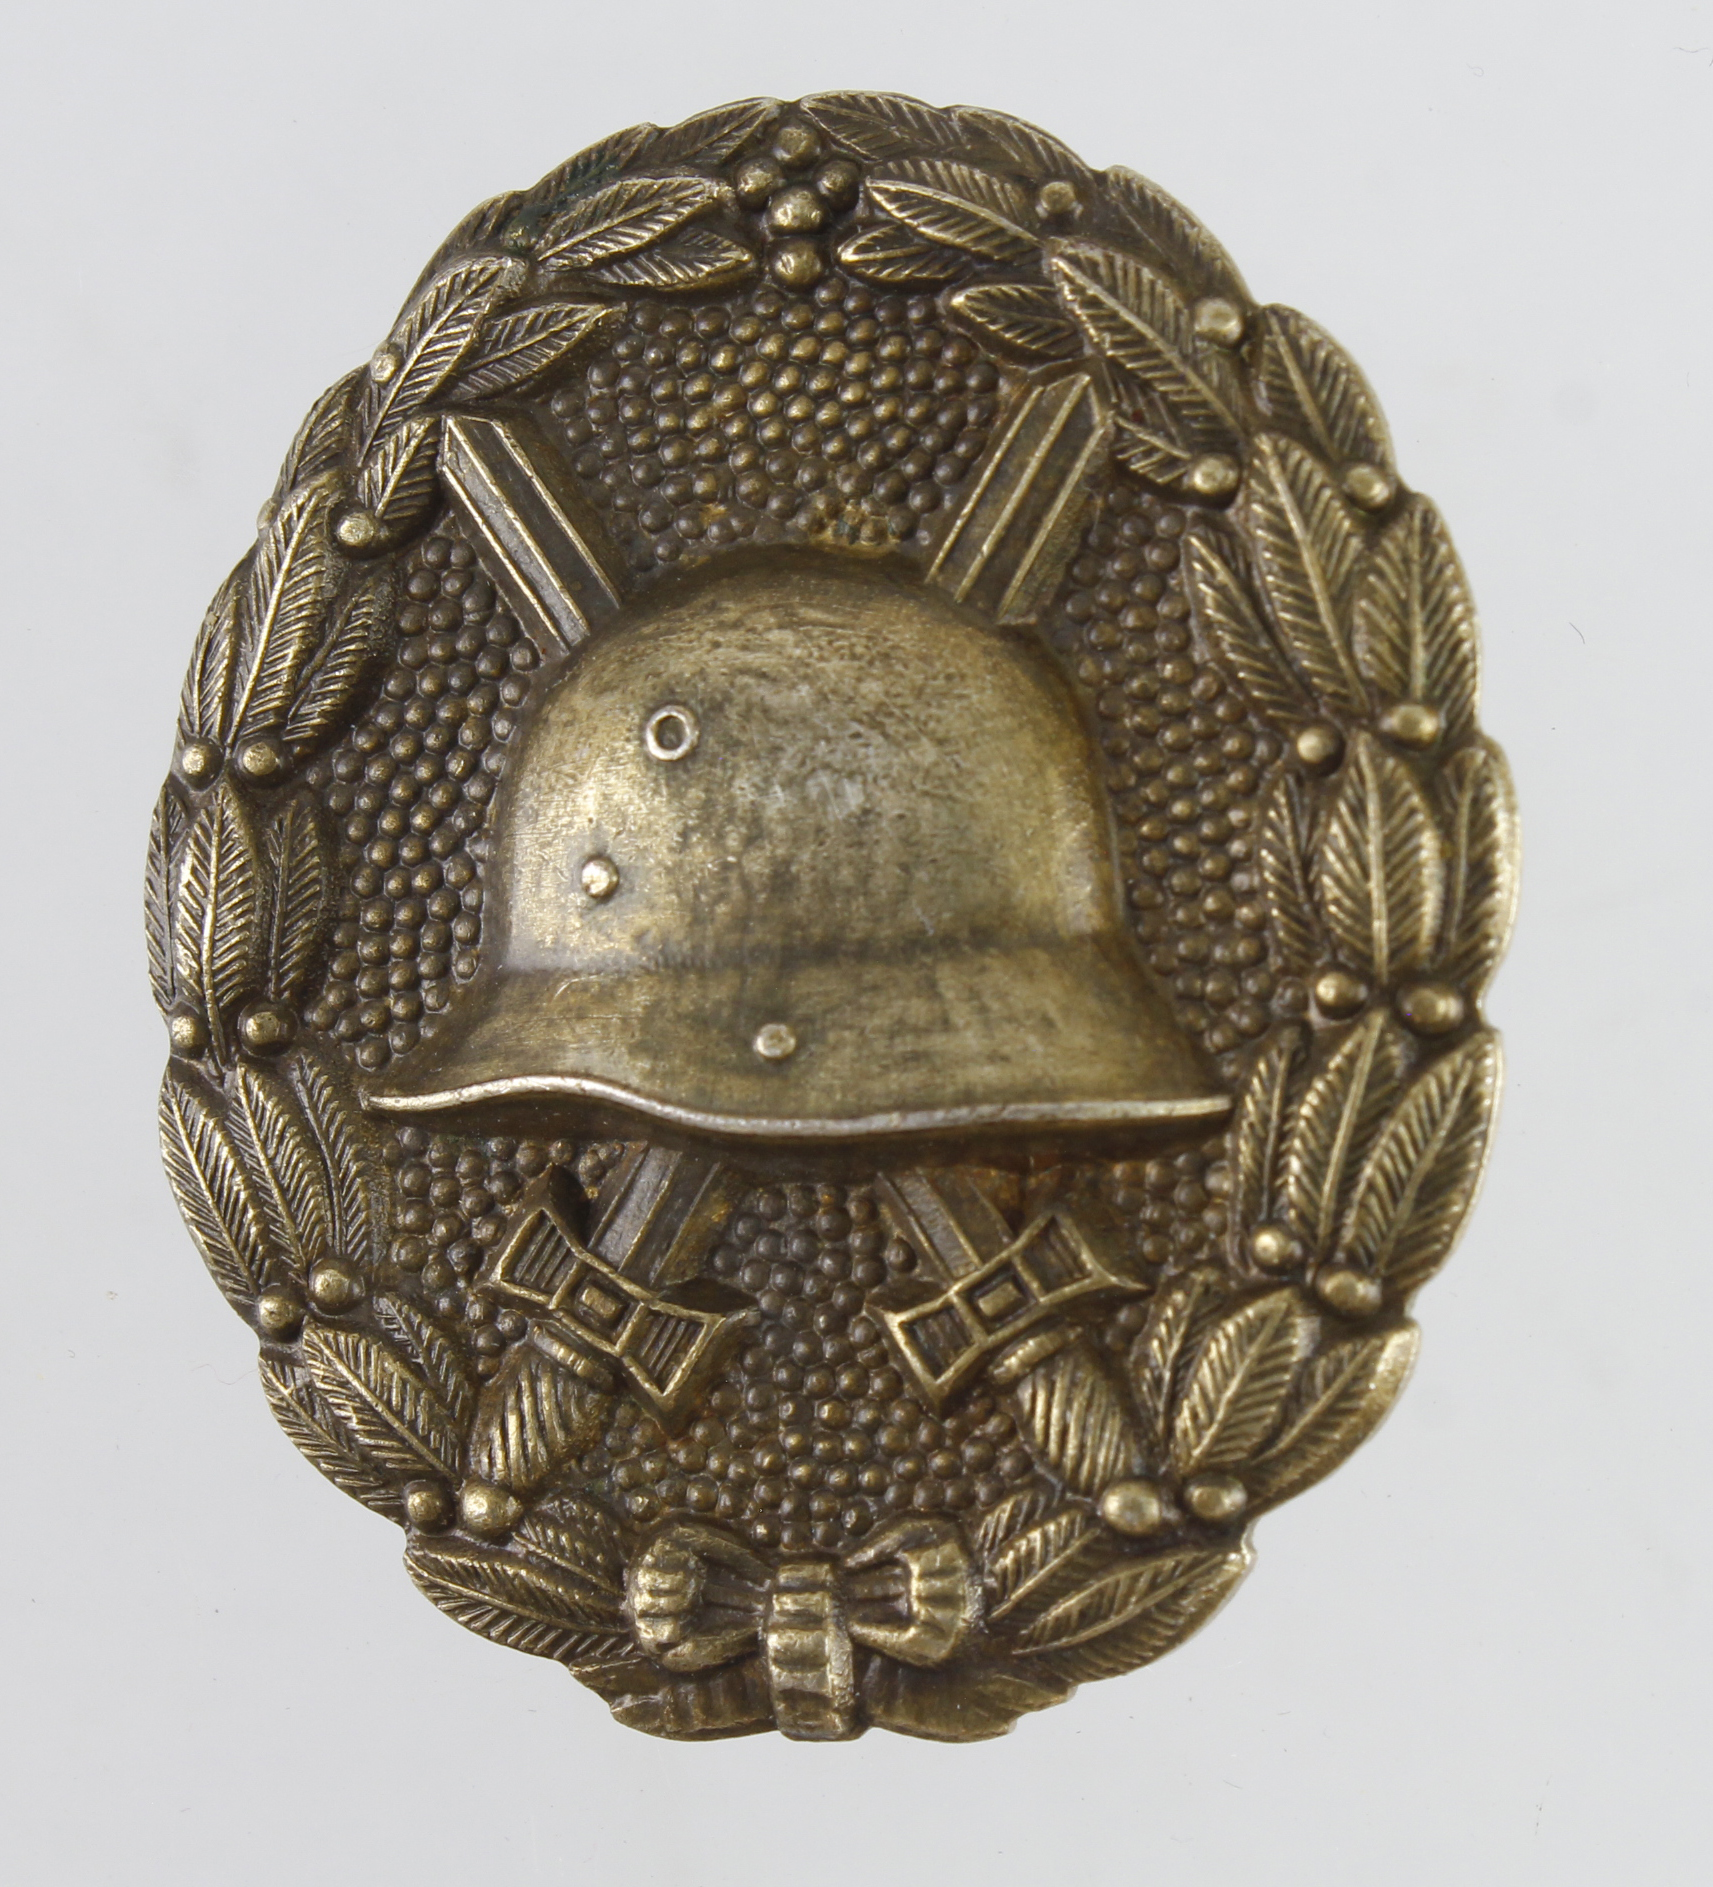 Germany from a one owner collection a wounds badge in silver, Imperial WW1.